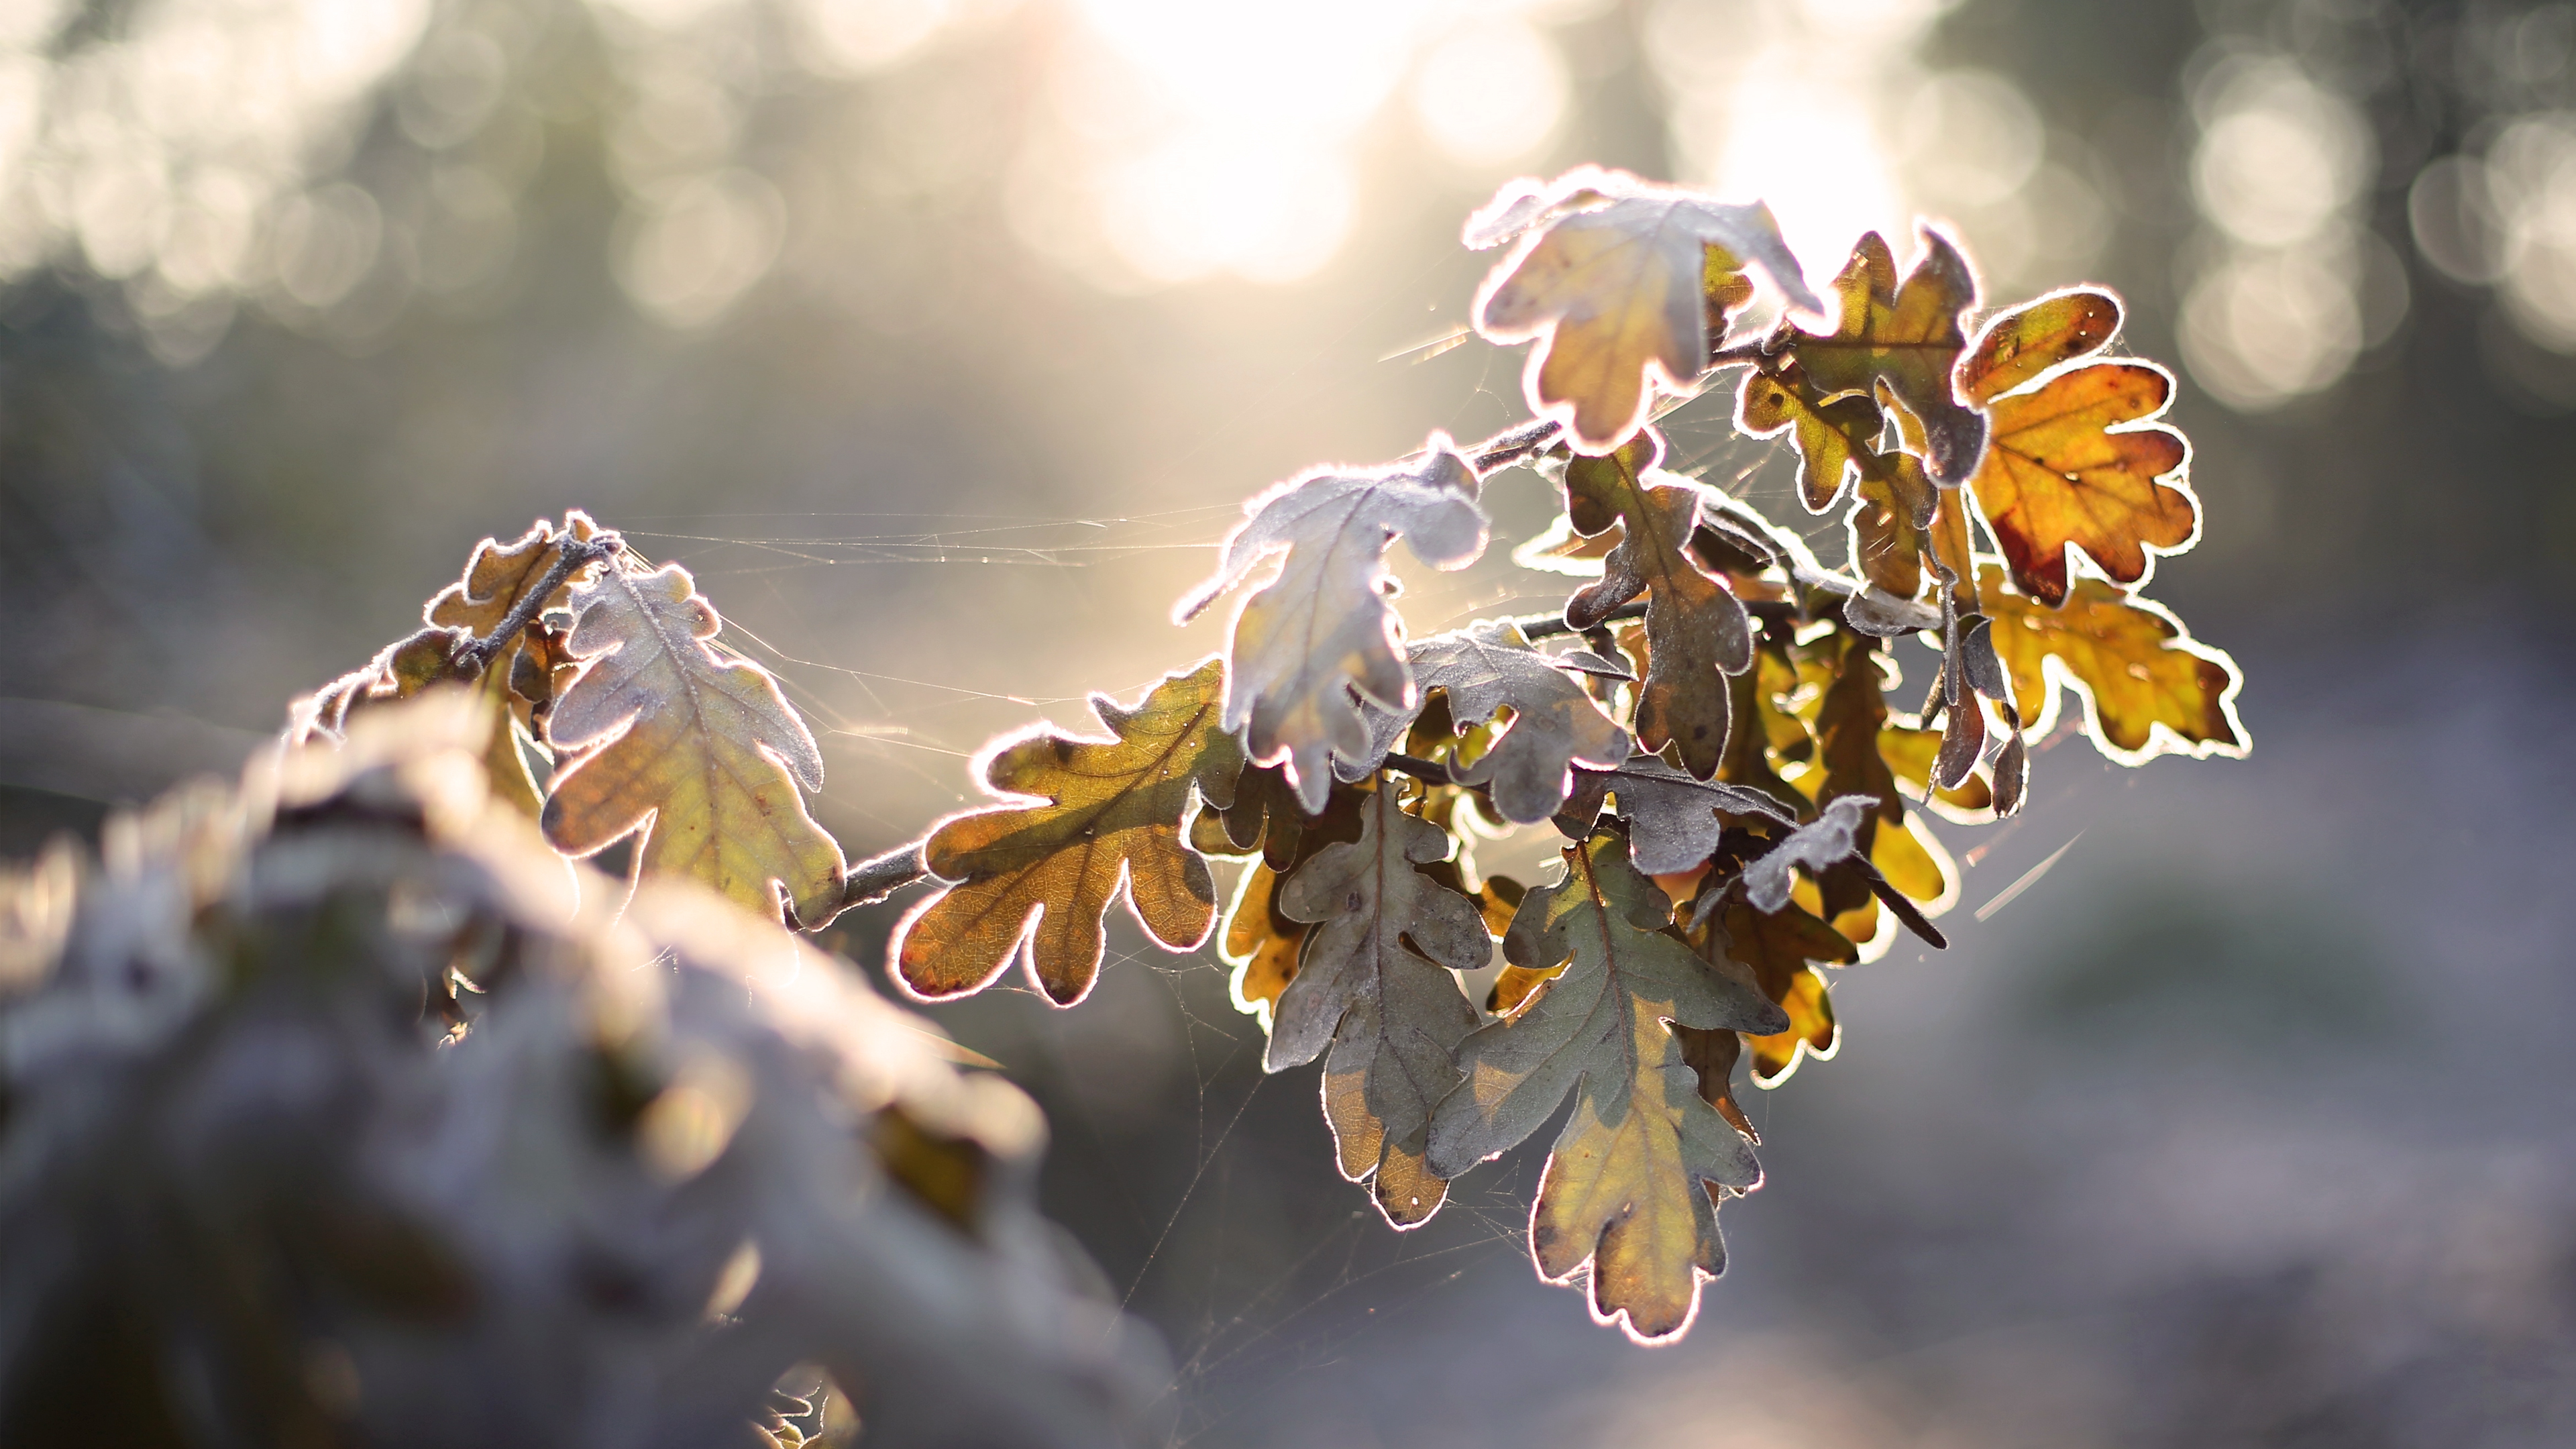 General 3840x2160 nature cold sunlight leaves plants frost spiderwebs